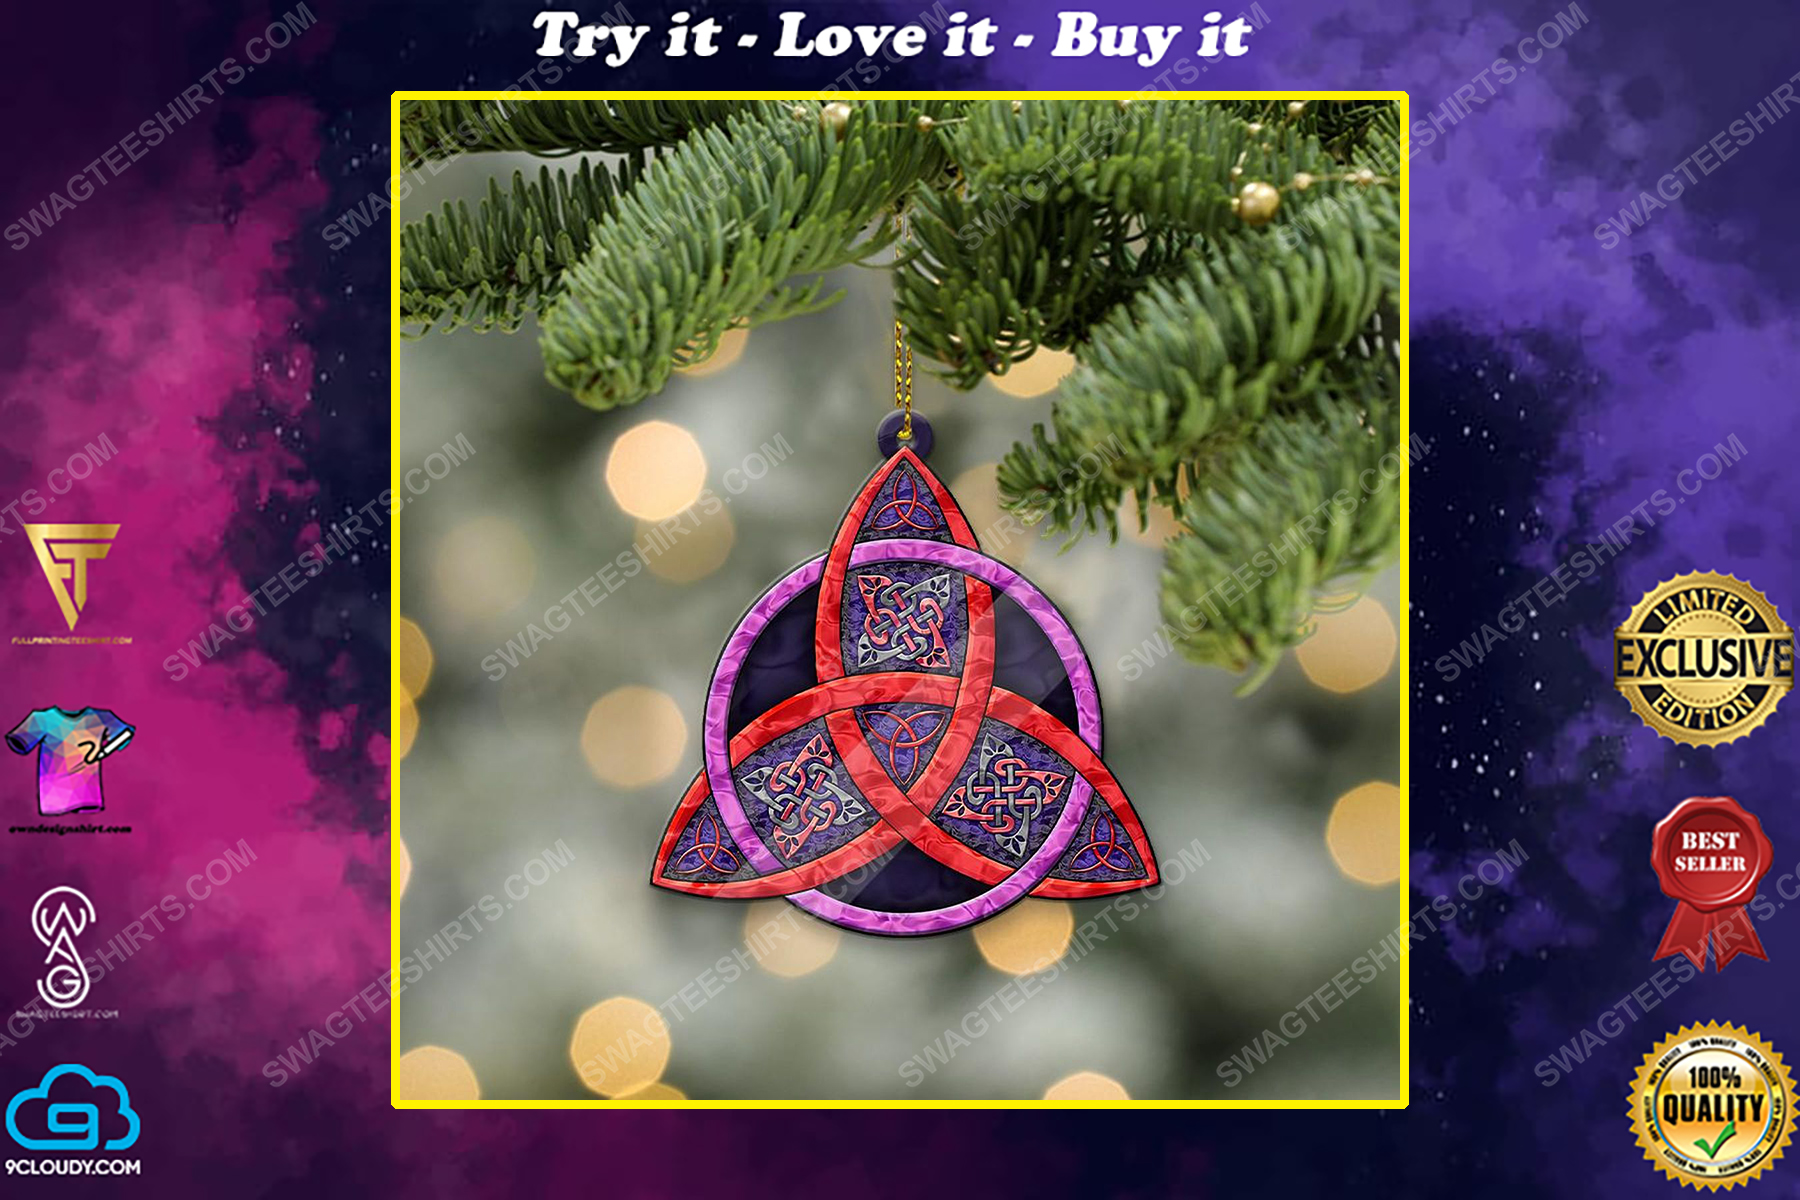 Celtic trinity red and violet christmas gift ornament